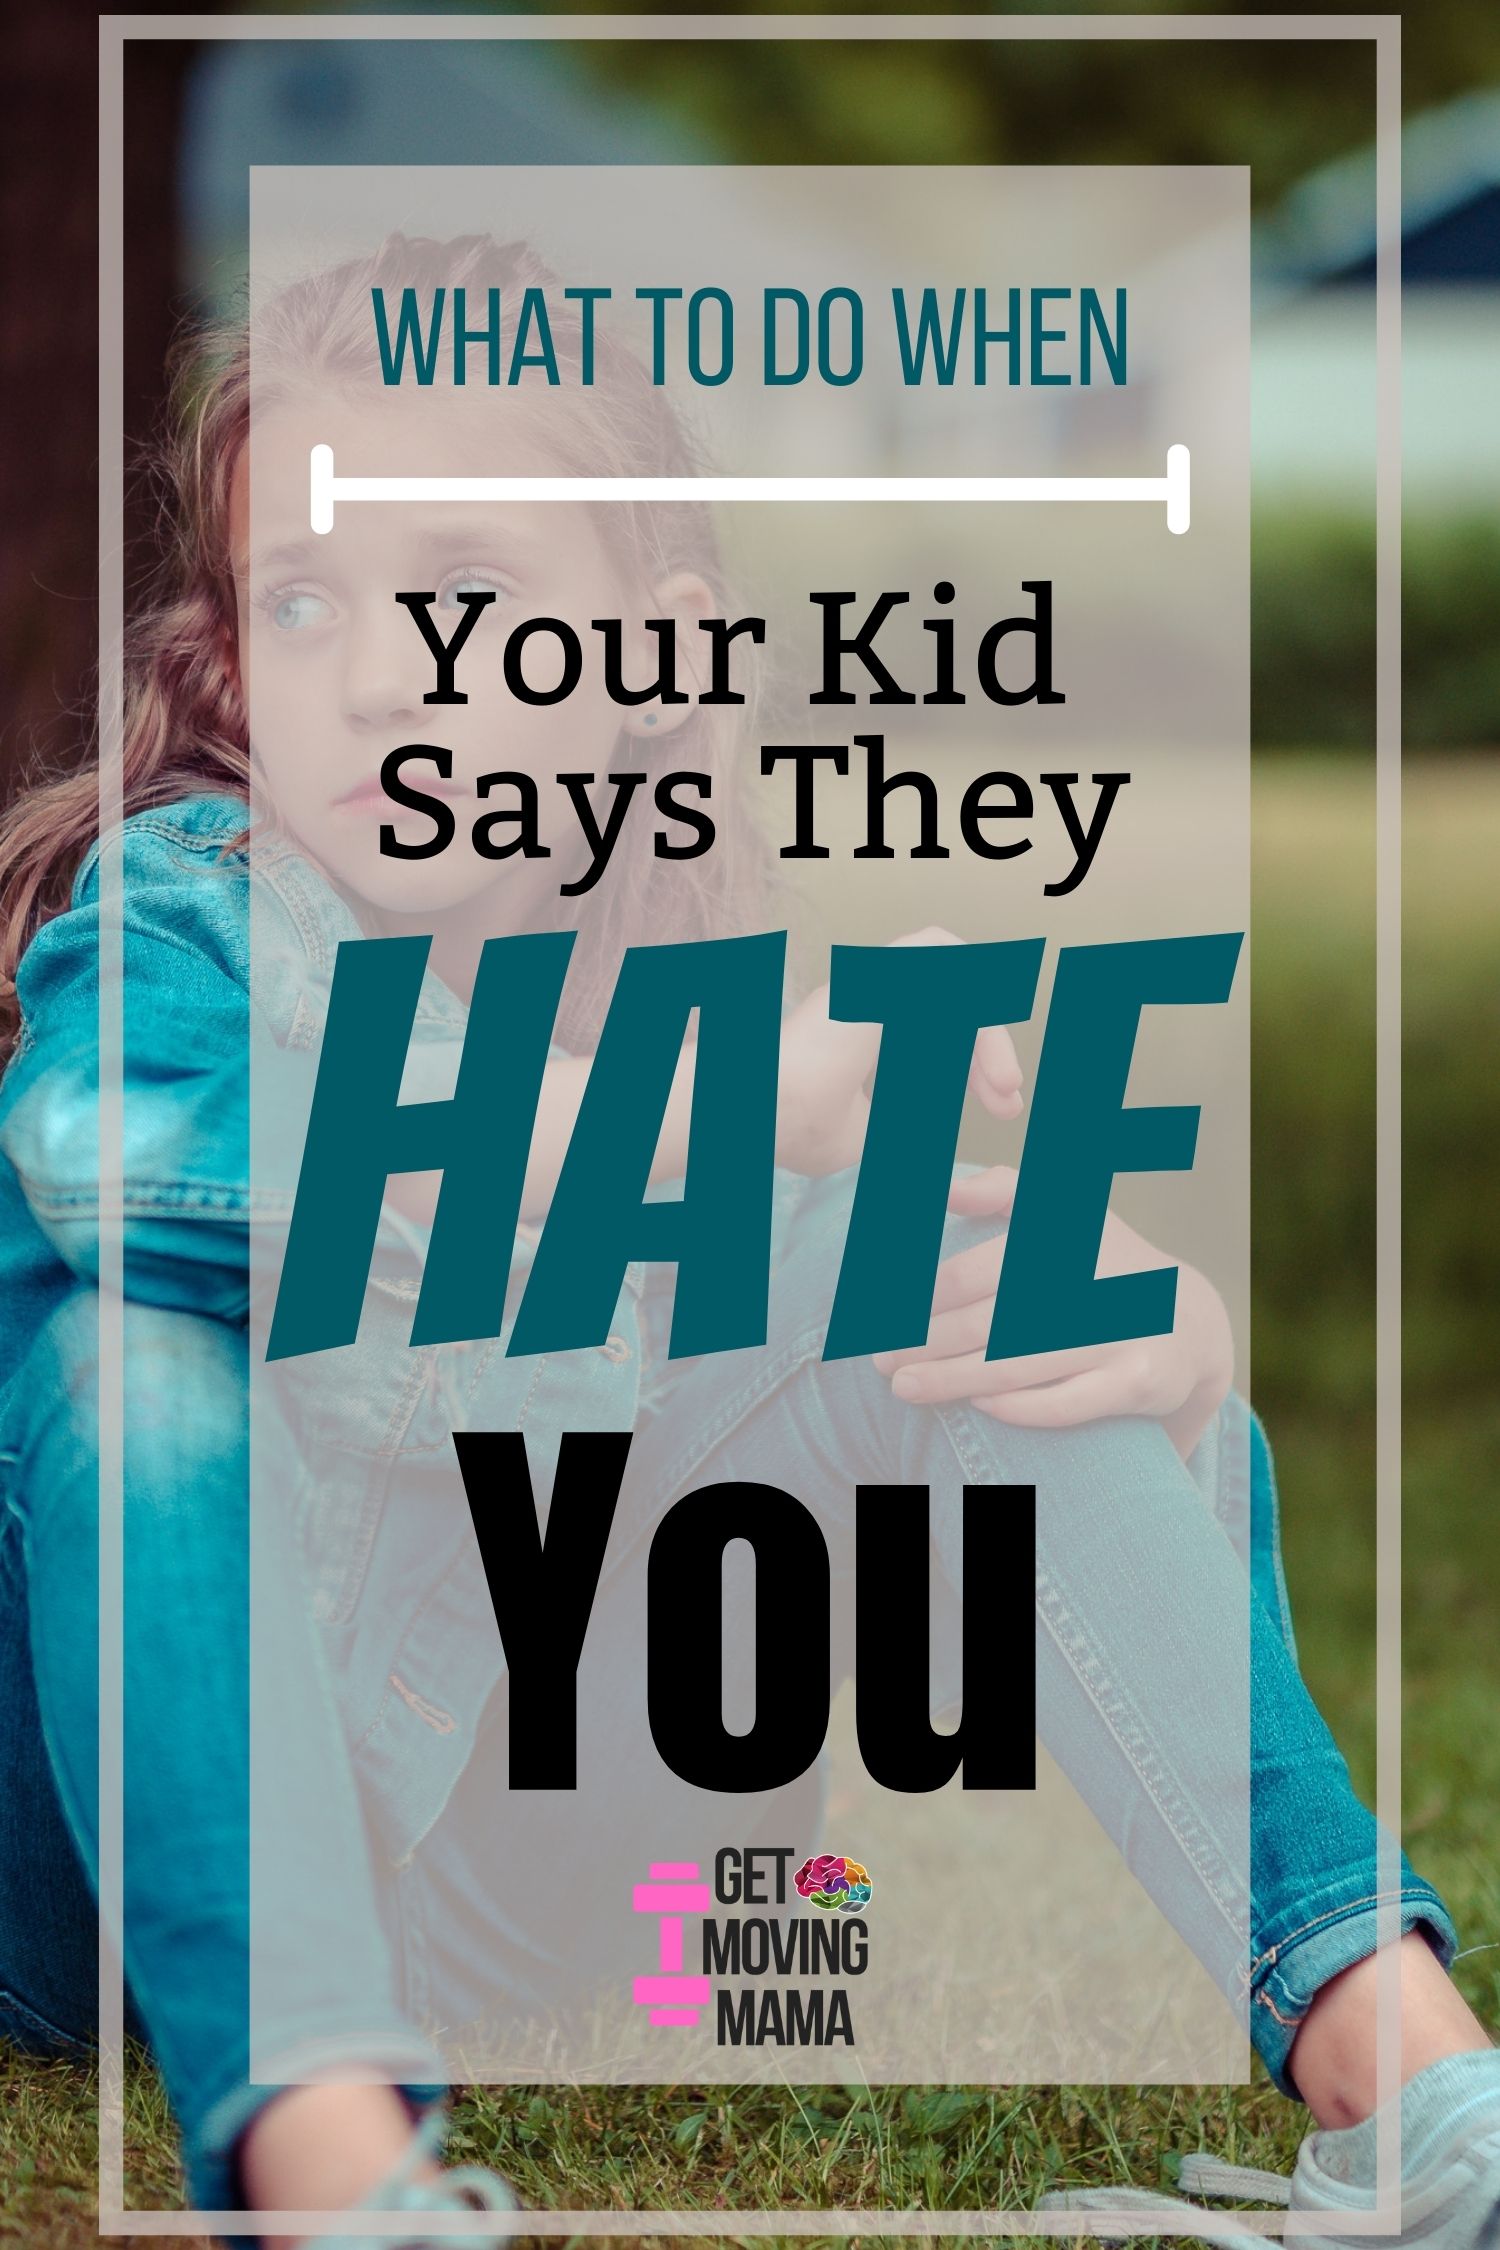 A picture of a girl who looks sullen with "what to do when your kid says they hate you" in overlay text.